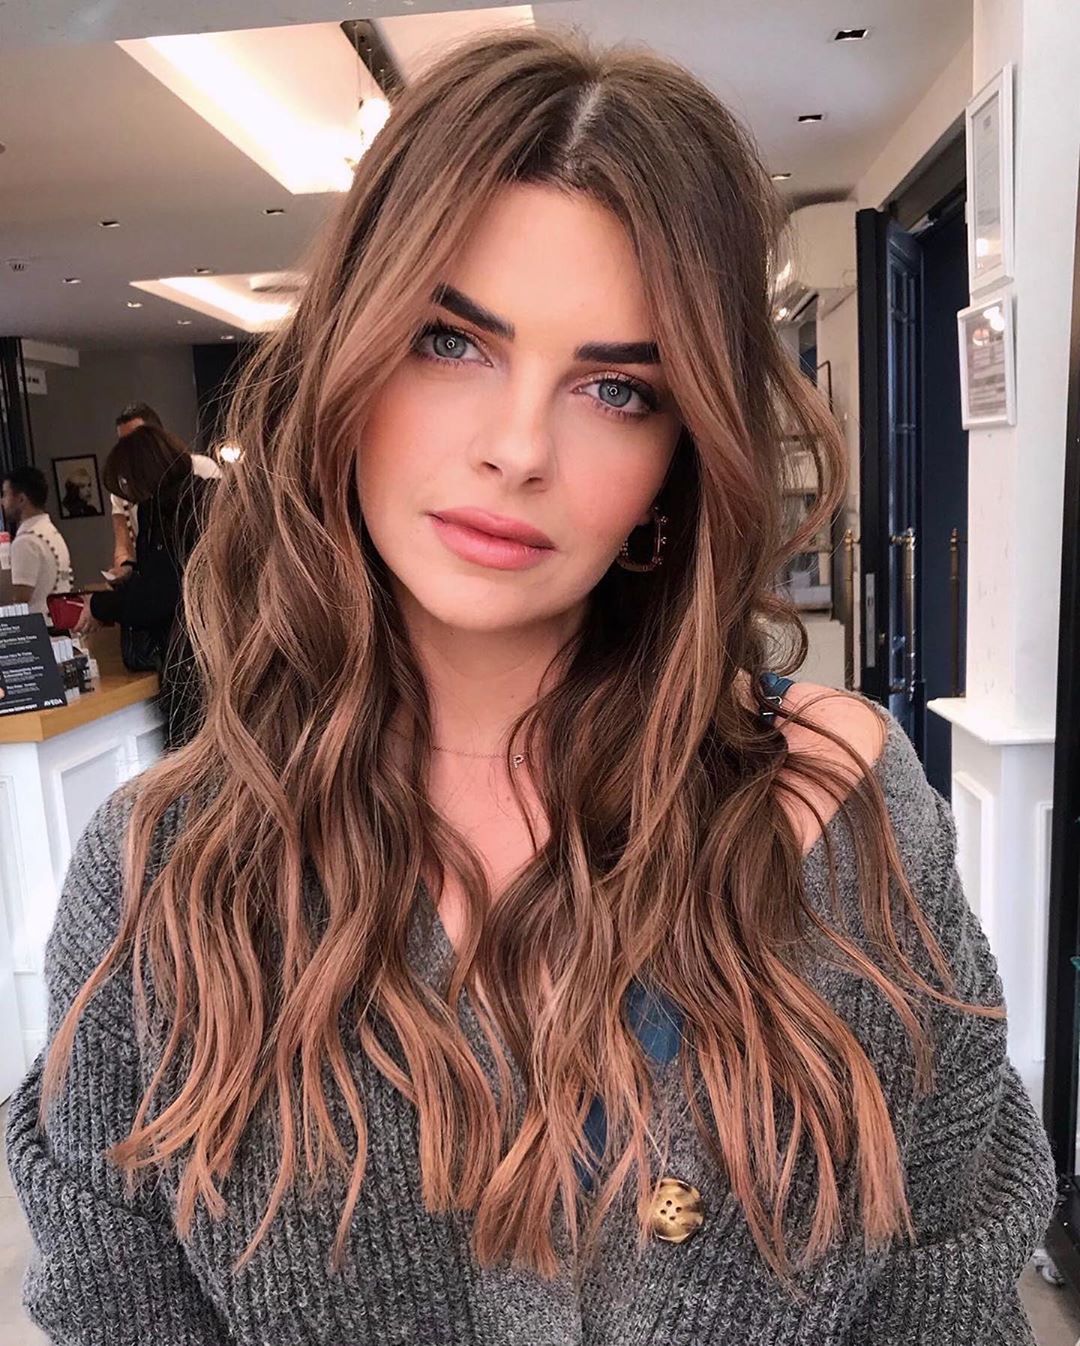 2021 Hairstyle And Color - Wavy Haircut